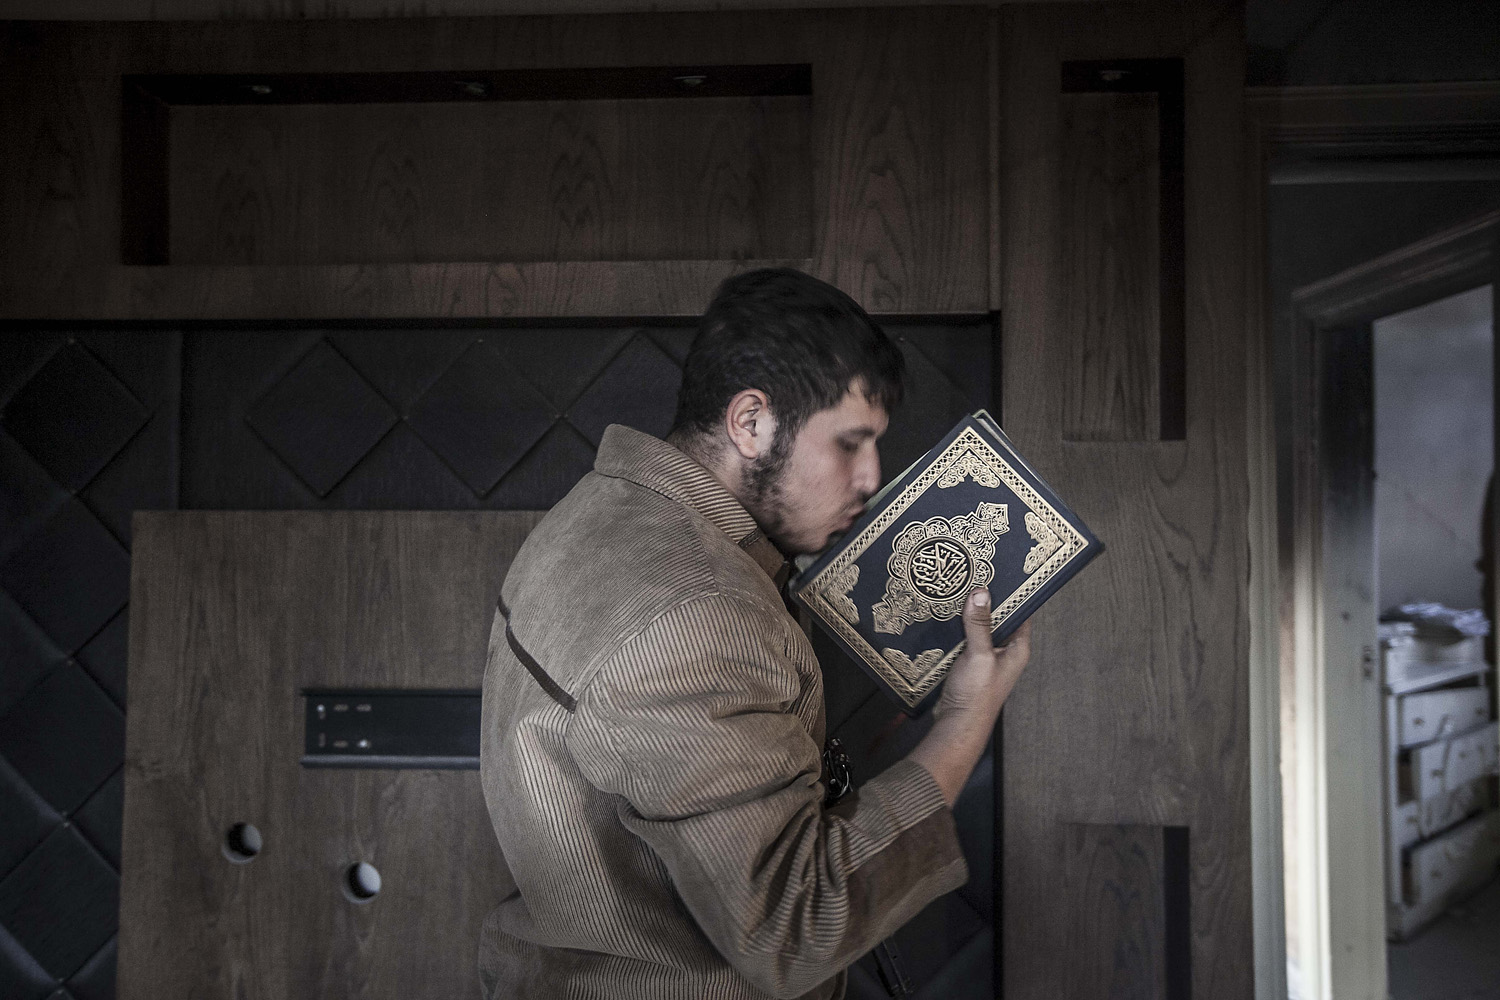 Image: Oct. 28, 2012. A rebel fighter belonging to the Liwa Al-Tawhid group, kisses a Quran as mortar explosions and gunshots are heard in the nearby battlefield in the Karm al-Jabel neighborhood of Aleppo, Syria.